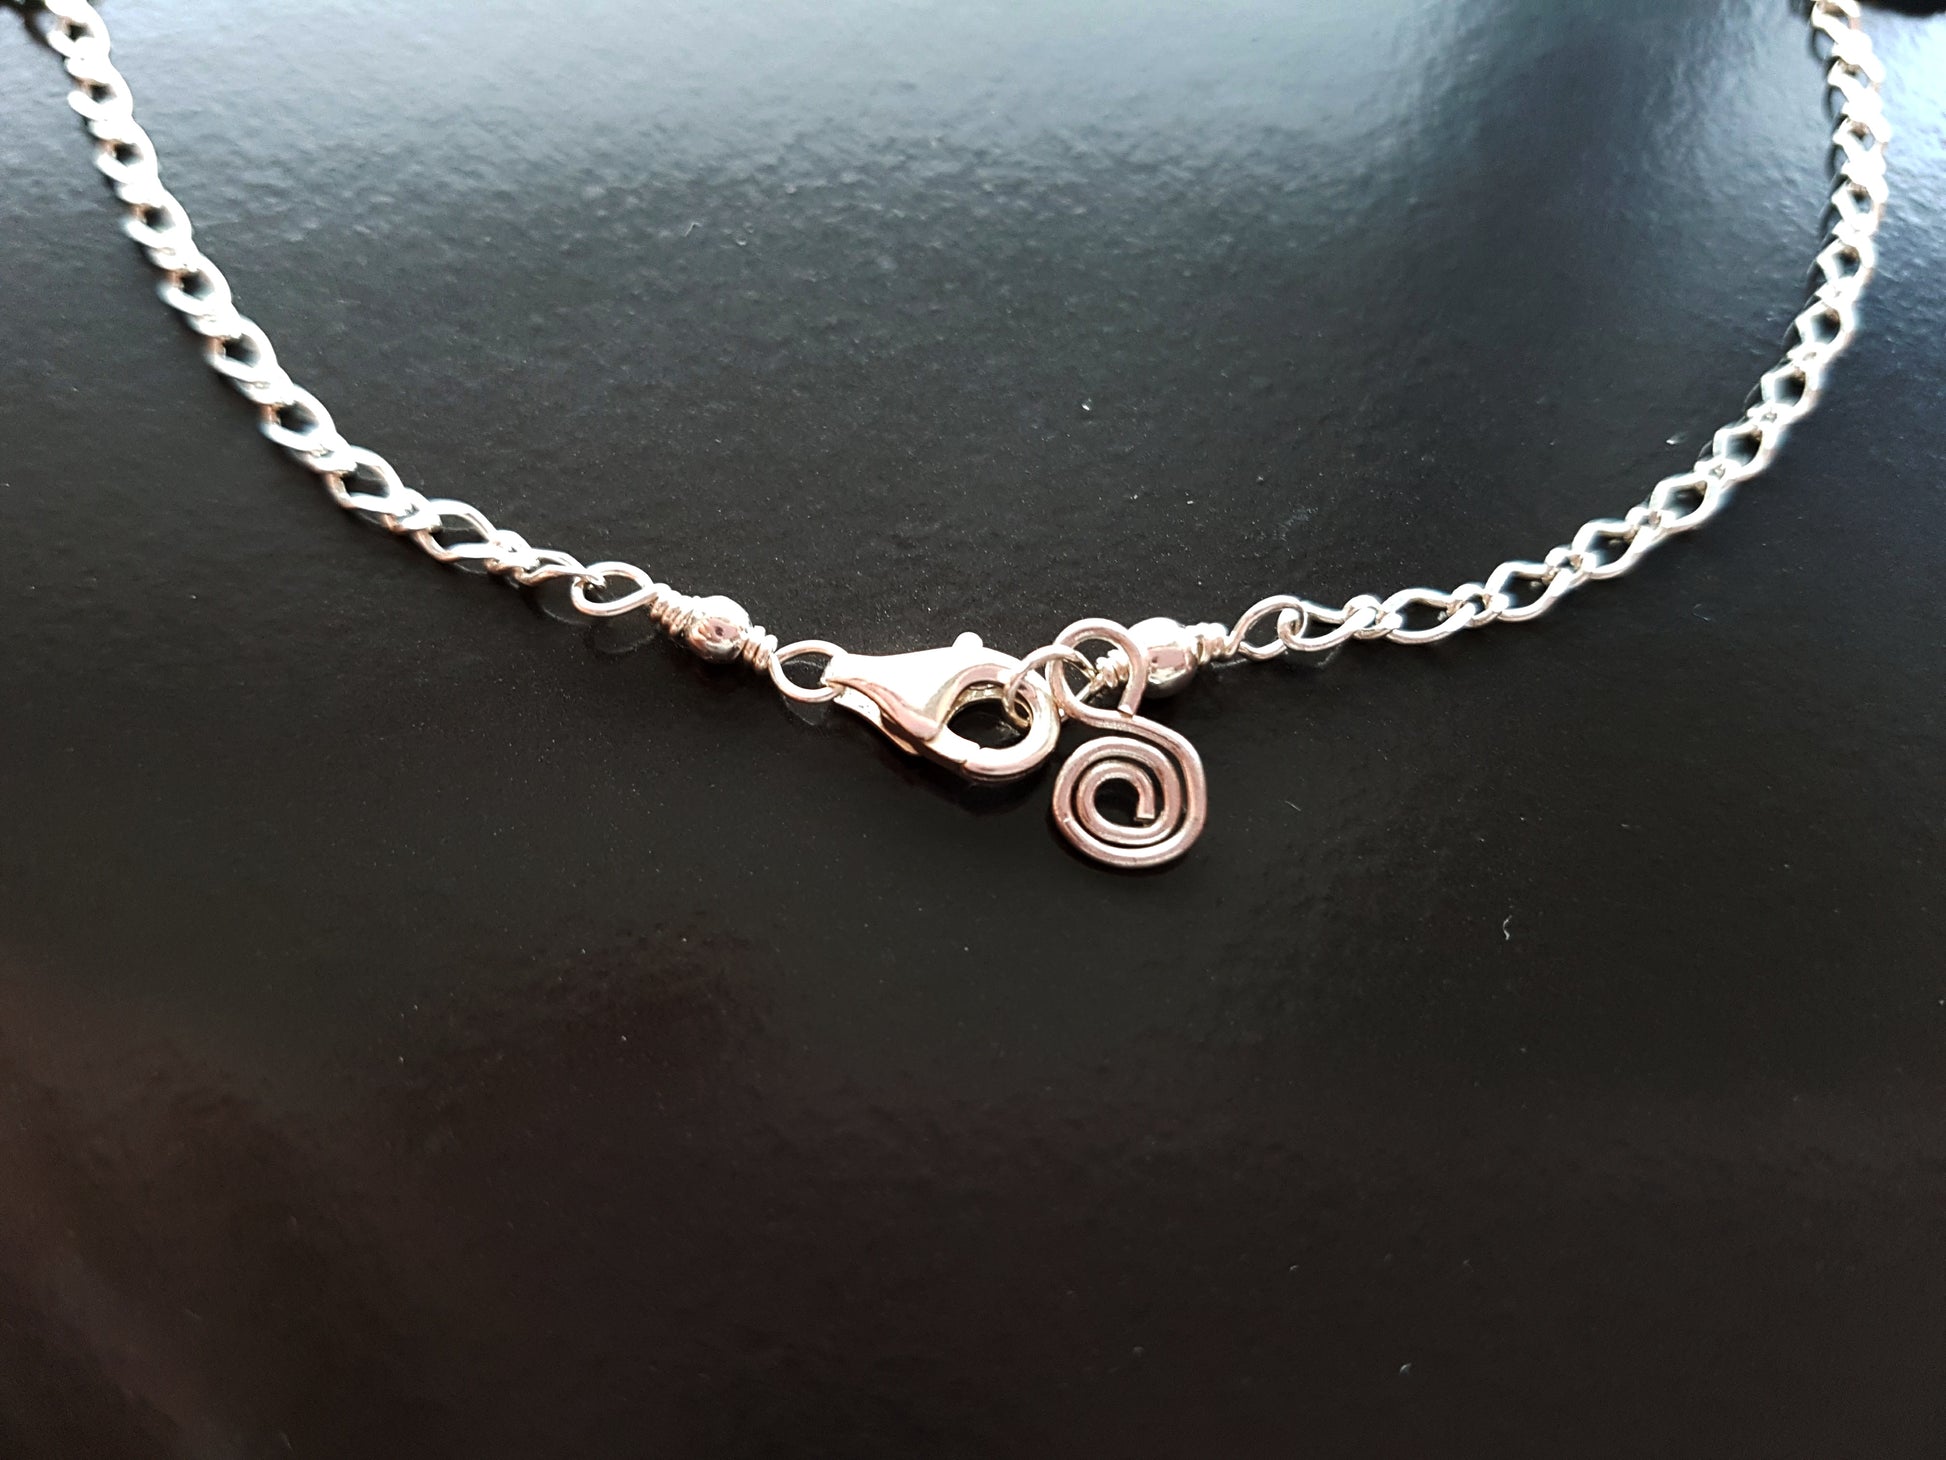 Anklet end with lobster claw clasp and Celtic Eternity Coil dangling on the end.